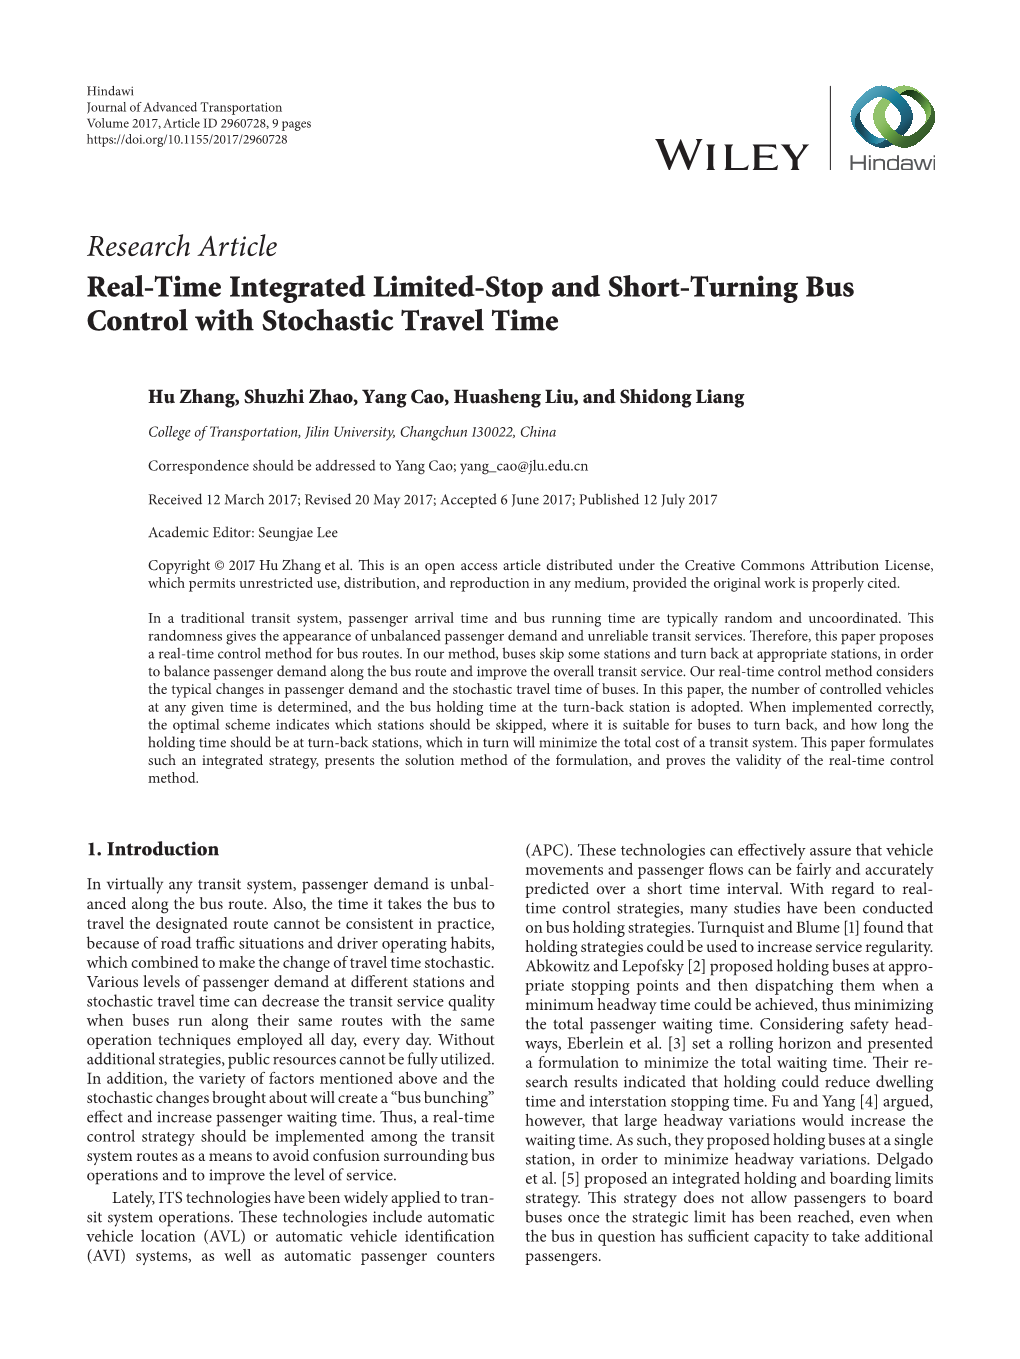 Research Article Real-Time Integrated Limited-Stop and Short-Turning Bus Control with Stochastic Travel Time